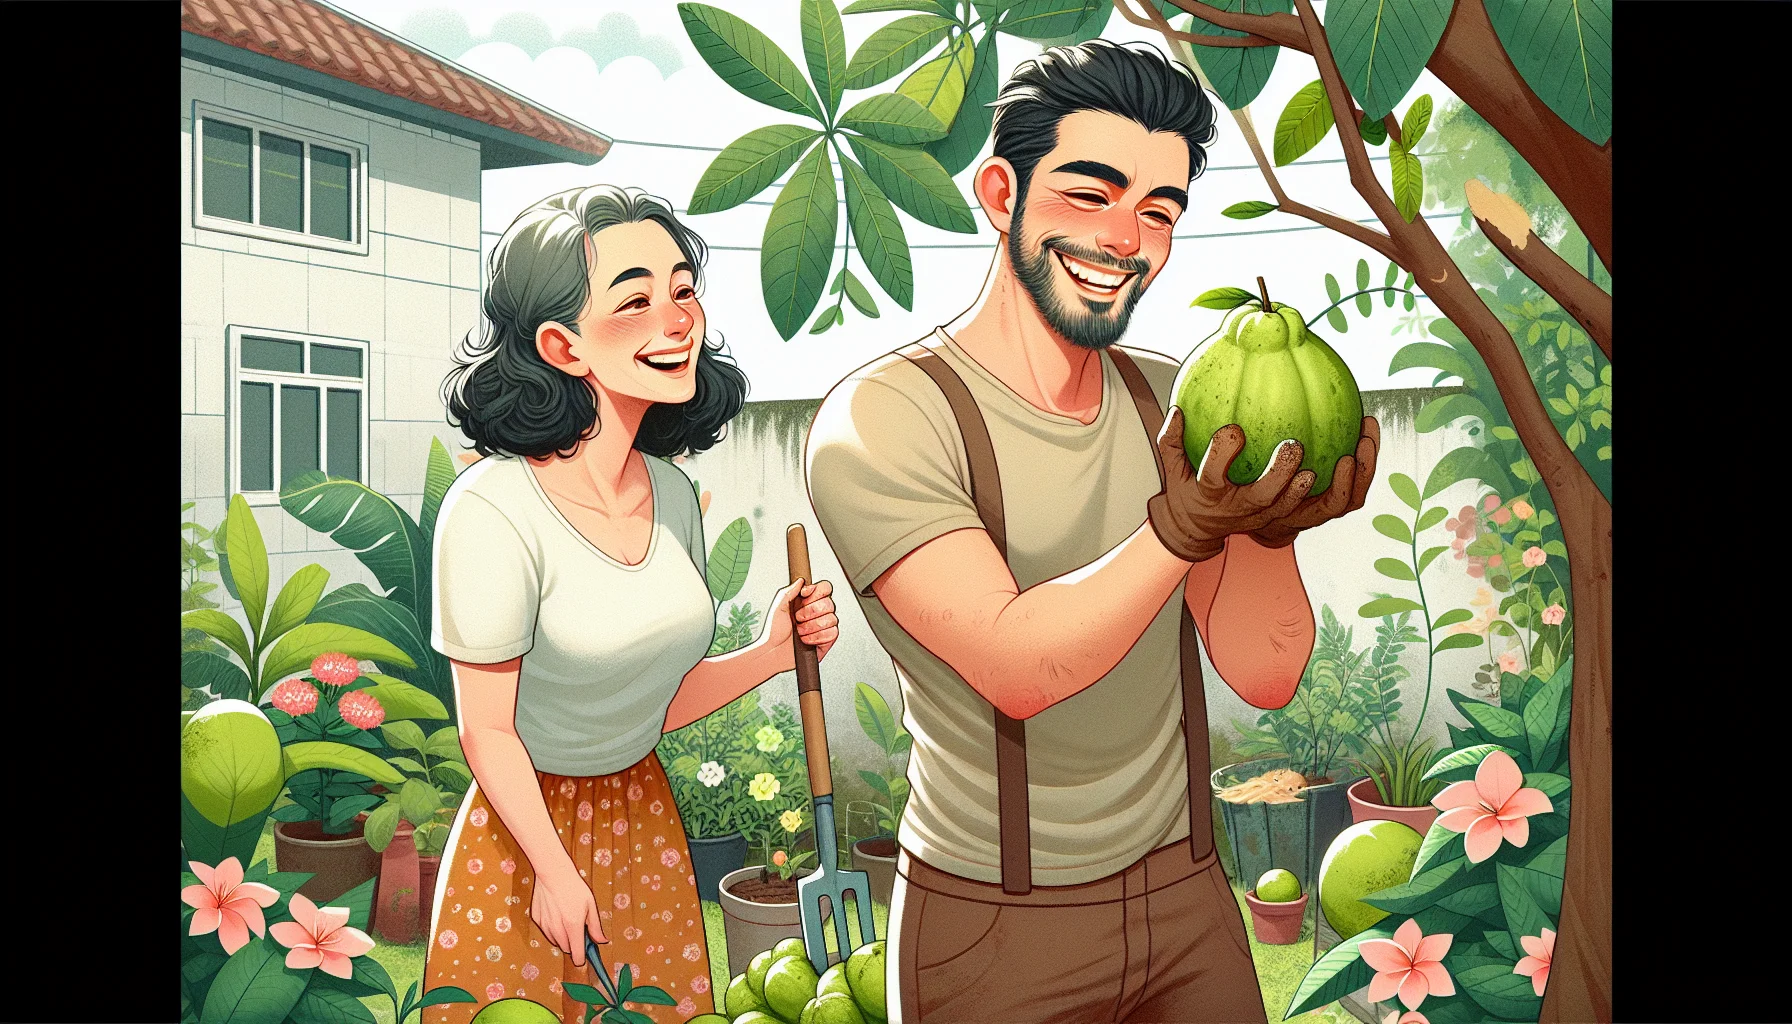 Generate an image of a light-hearted and amusing scenario where a Caucasian woman and a South Asian man are enjoying gardening. They are surrounded by luscious green plants and colorful flowers in a quaint backyard garden. The man is standing by a guava tree, plucking a ripe and juicy guava off with a big smile on his face, whilst the woman watches him, amused and delighted. Their clothes are slightly dirty, indicating their hard work, and their faces are flushed with joy. This picture is an illustration of the simple bliss of gardening and enjoying the fruits of one's labor, quite literally.